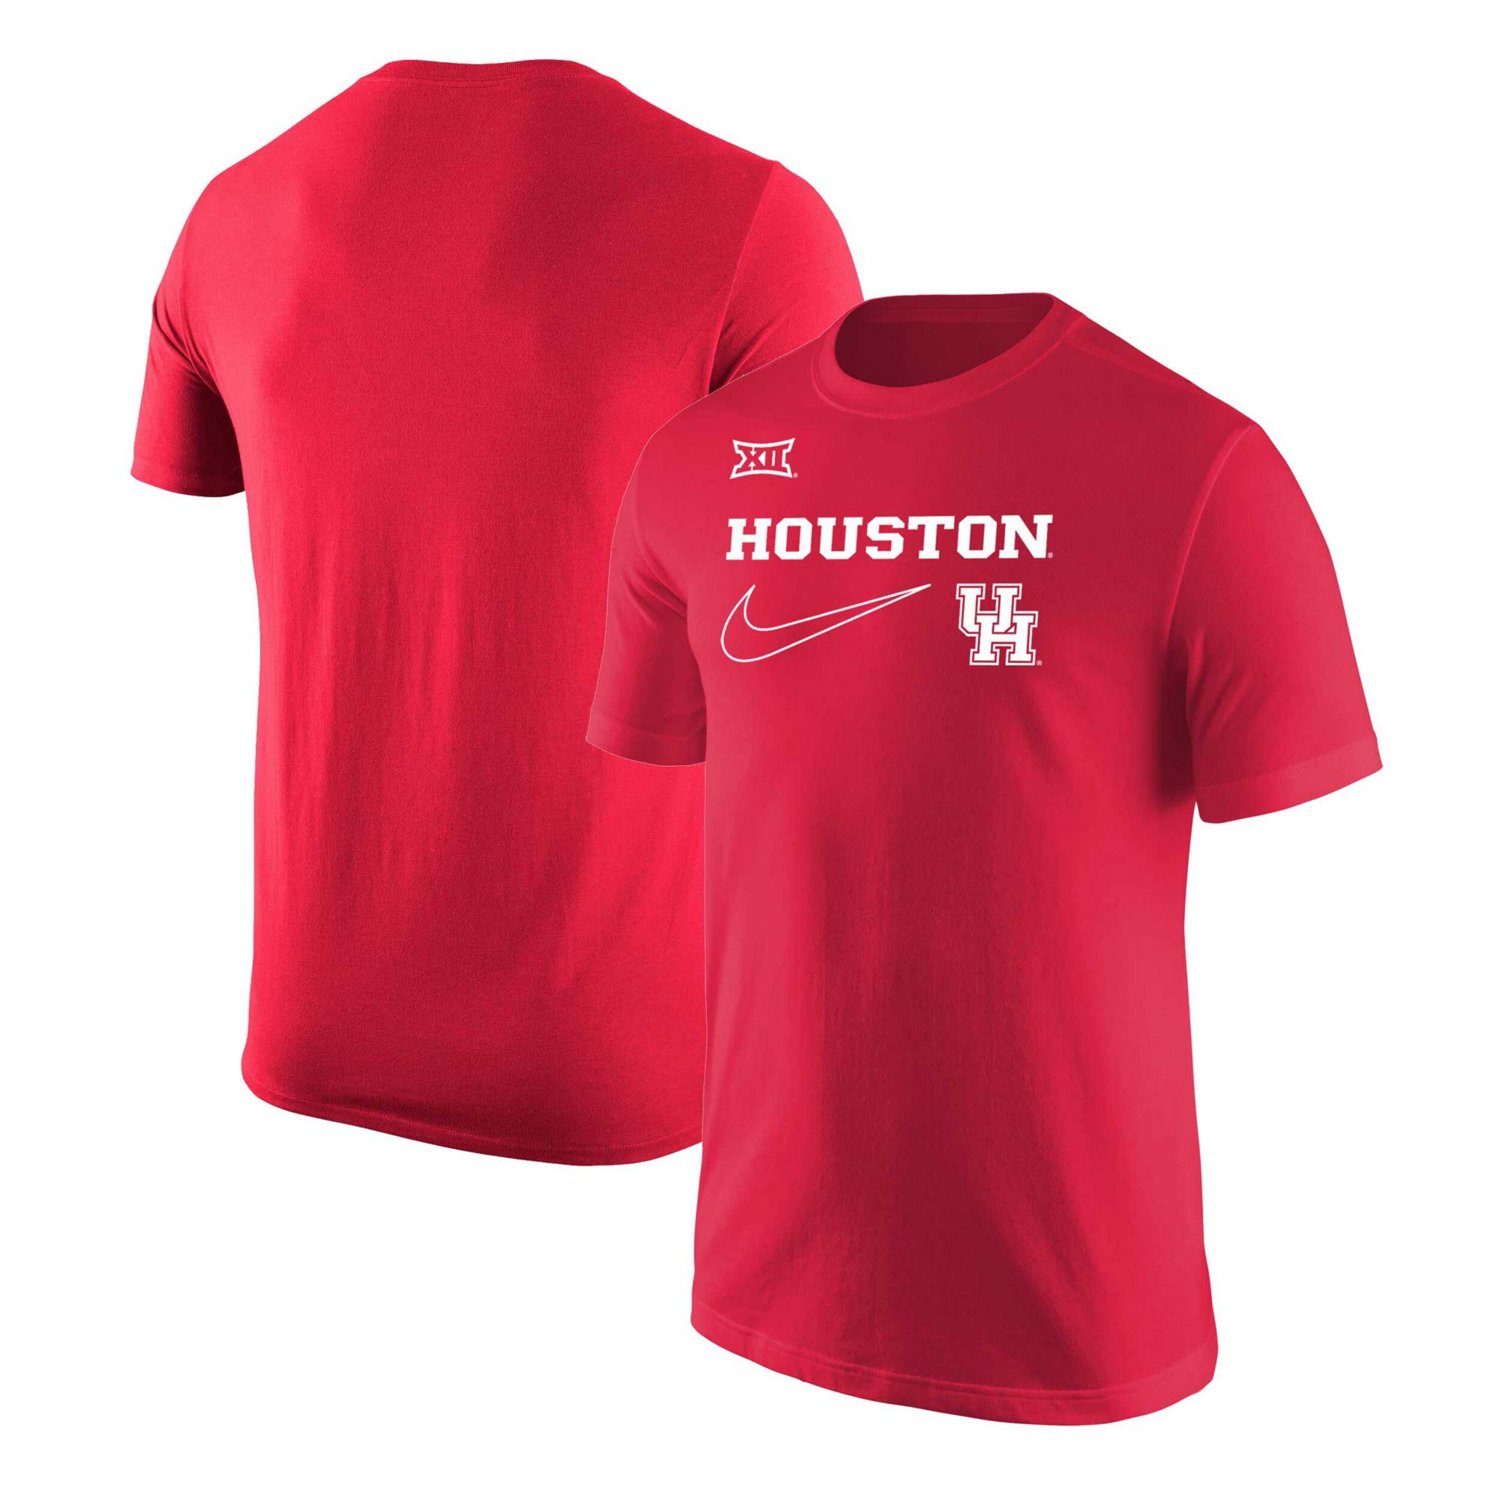 https://academy.scene7.com/is/image/academy//apparel-misc/nike-houston-cougars-core-t-shirt-m11332-p023454-bgtwuh-65n-red/b492fae34631497a92c4c17bb6cc136c?$d-plp-product-image$